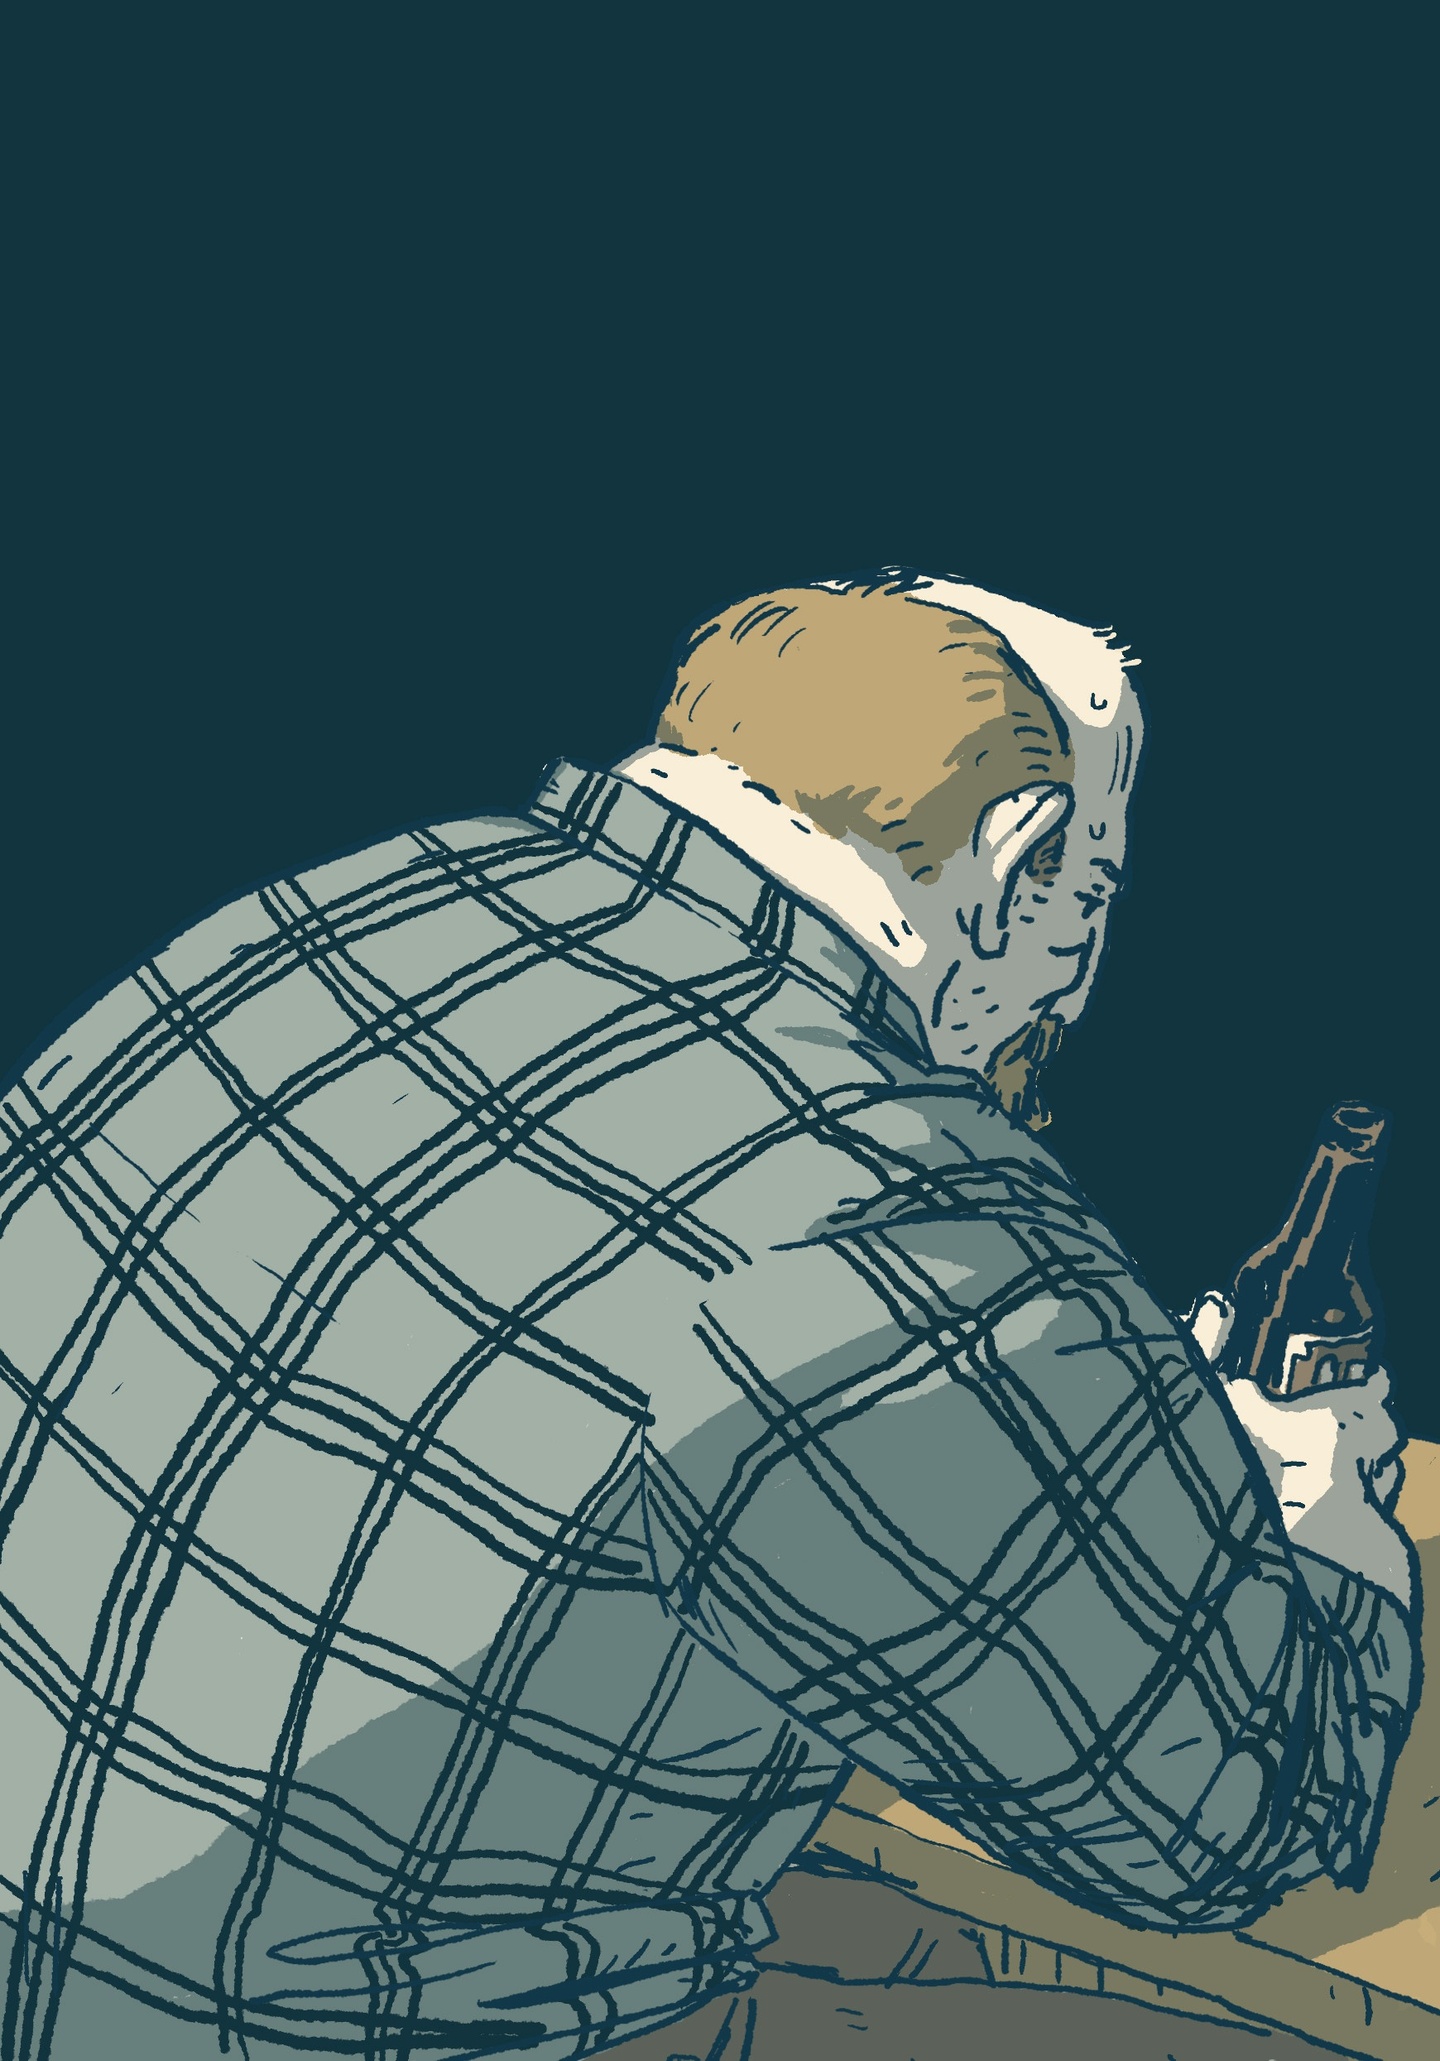 Person in a flannel hunched over a countertop holding a bottle. The background is a deep slate/teal blue. The person looks forward intensely.